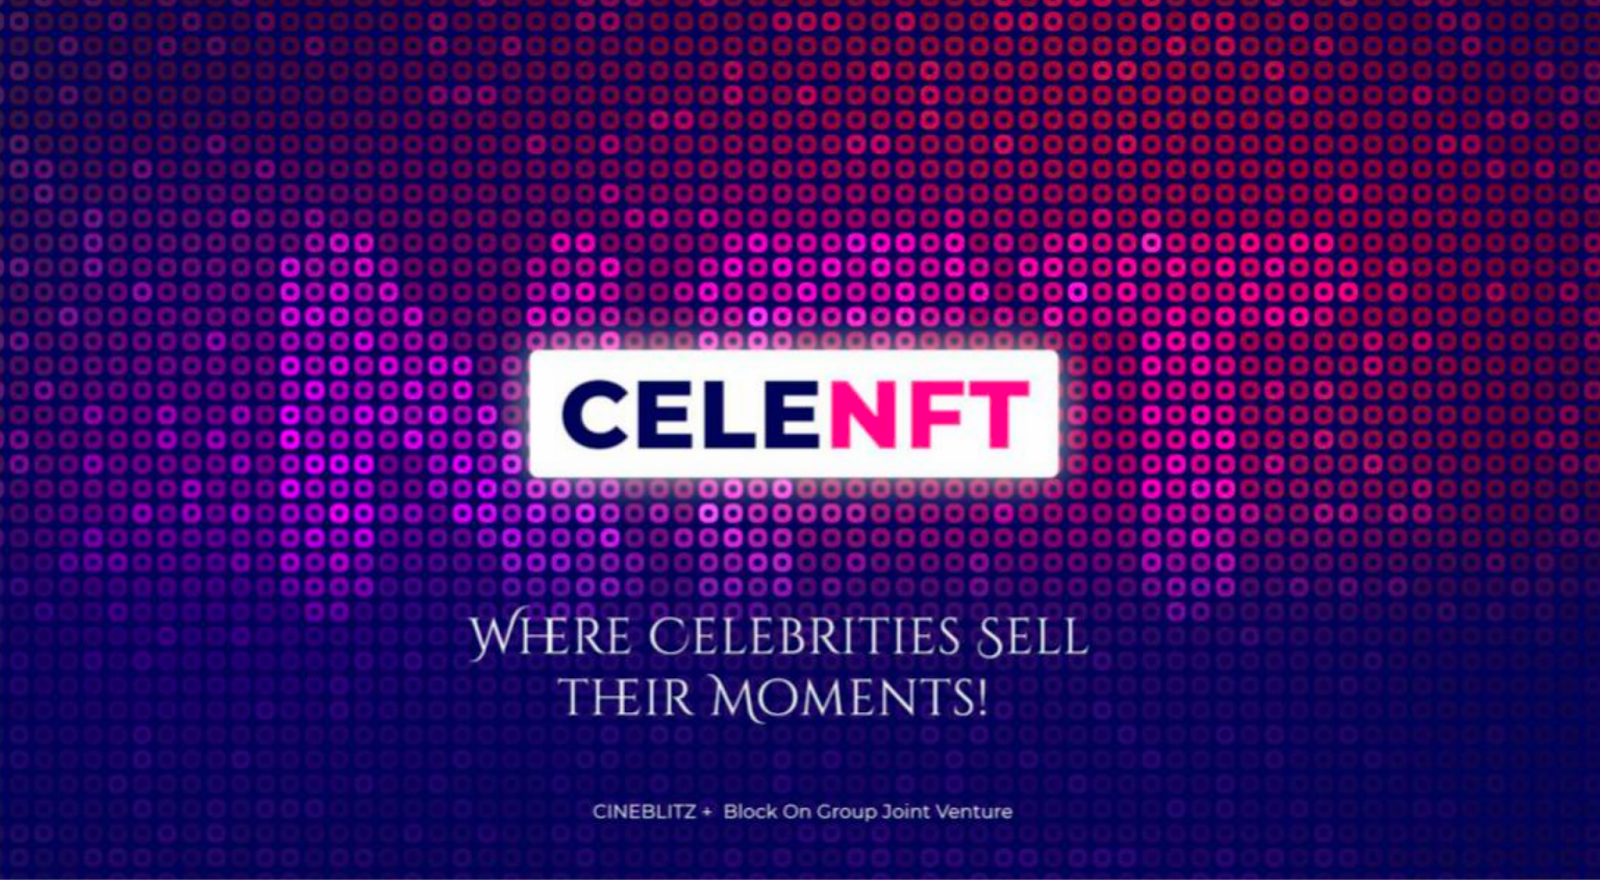 CELENFT, Tuesday, January 18, 2022, Press release picture